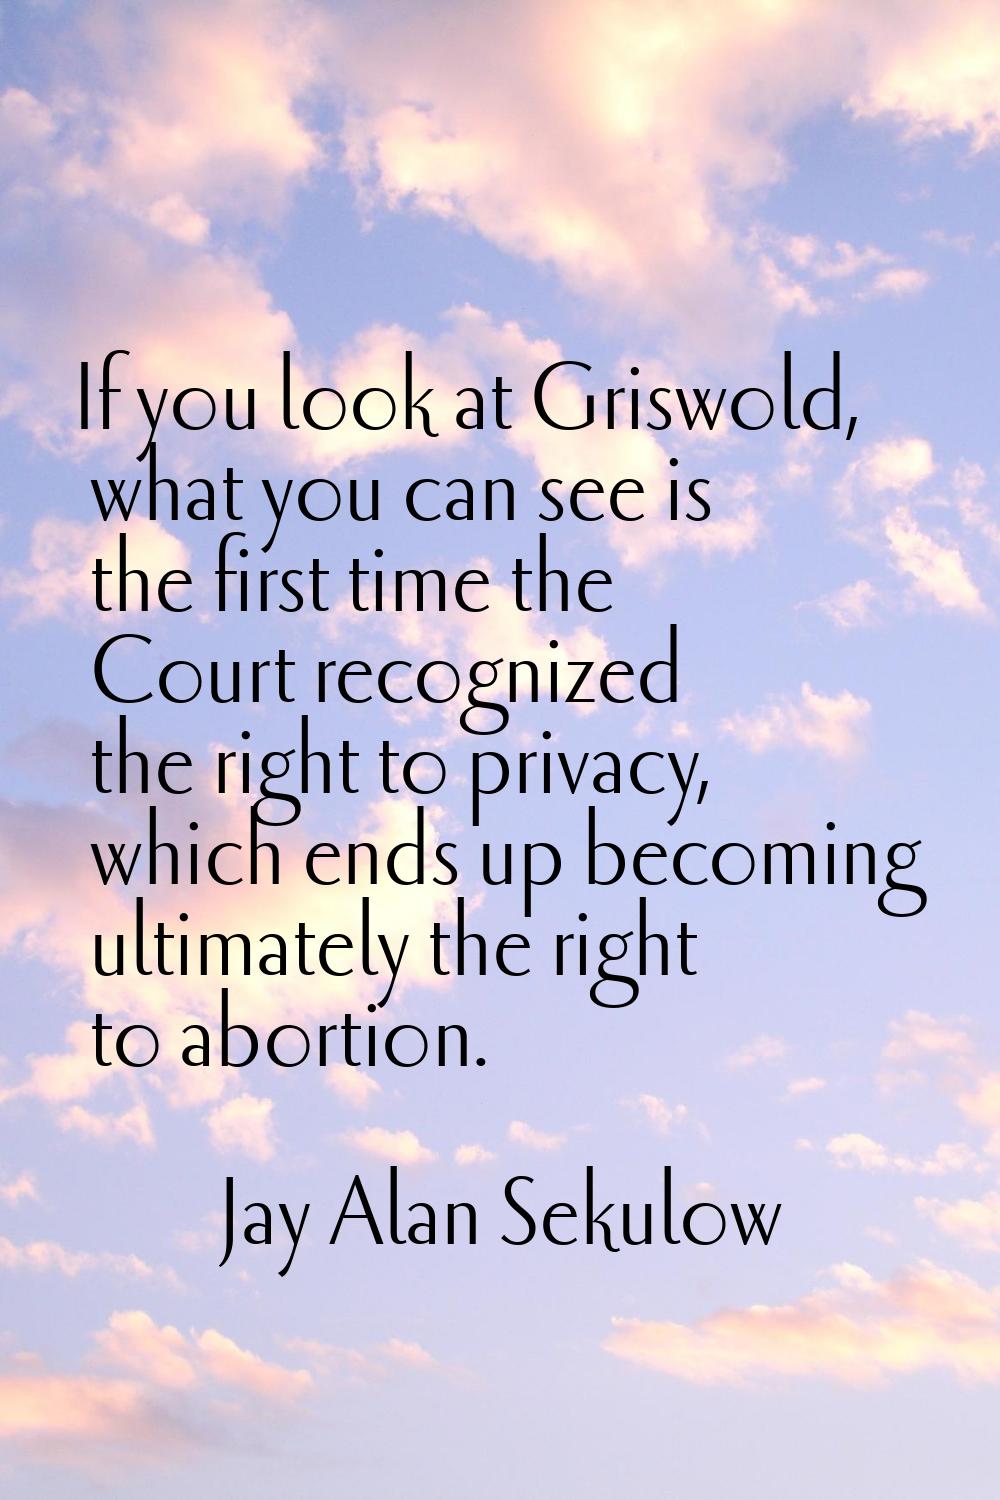 If you look at Griswold, what you can see is the first time the Court recognized the right to priva